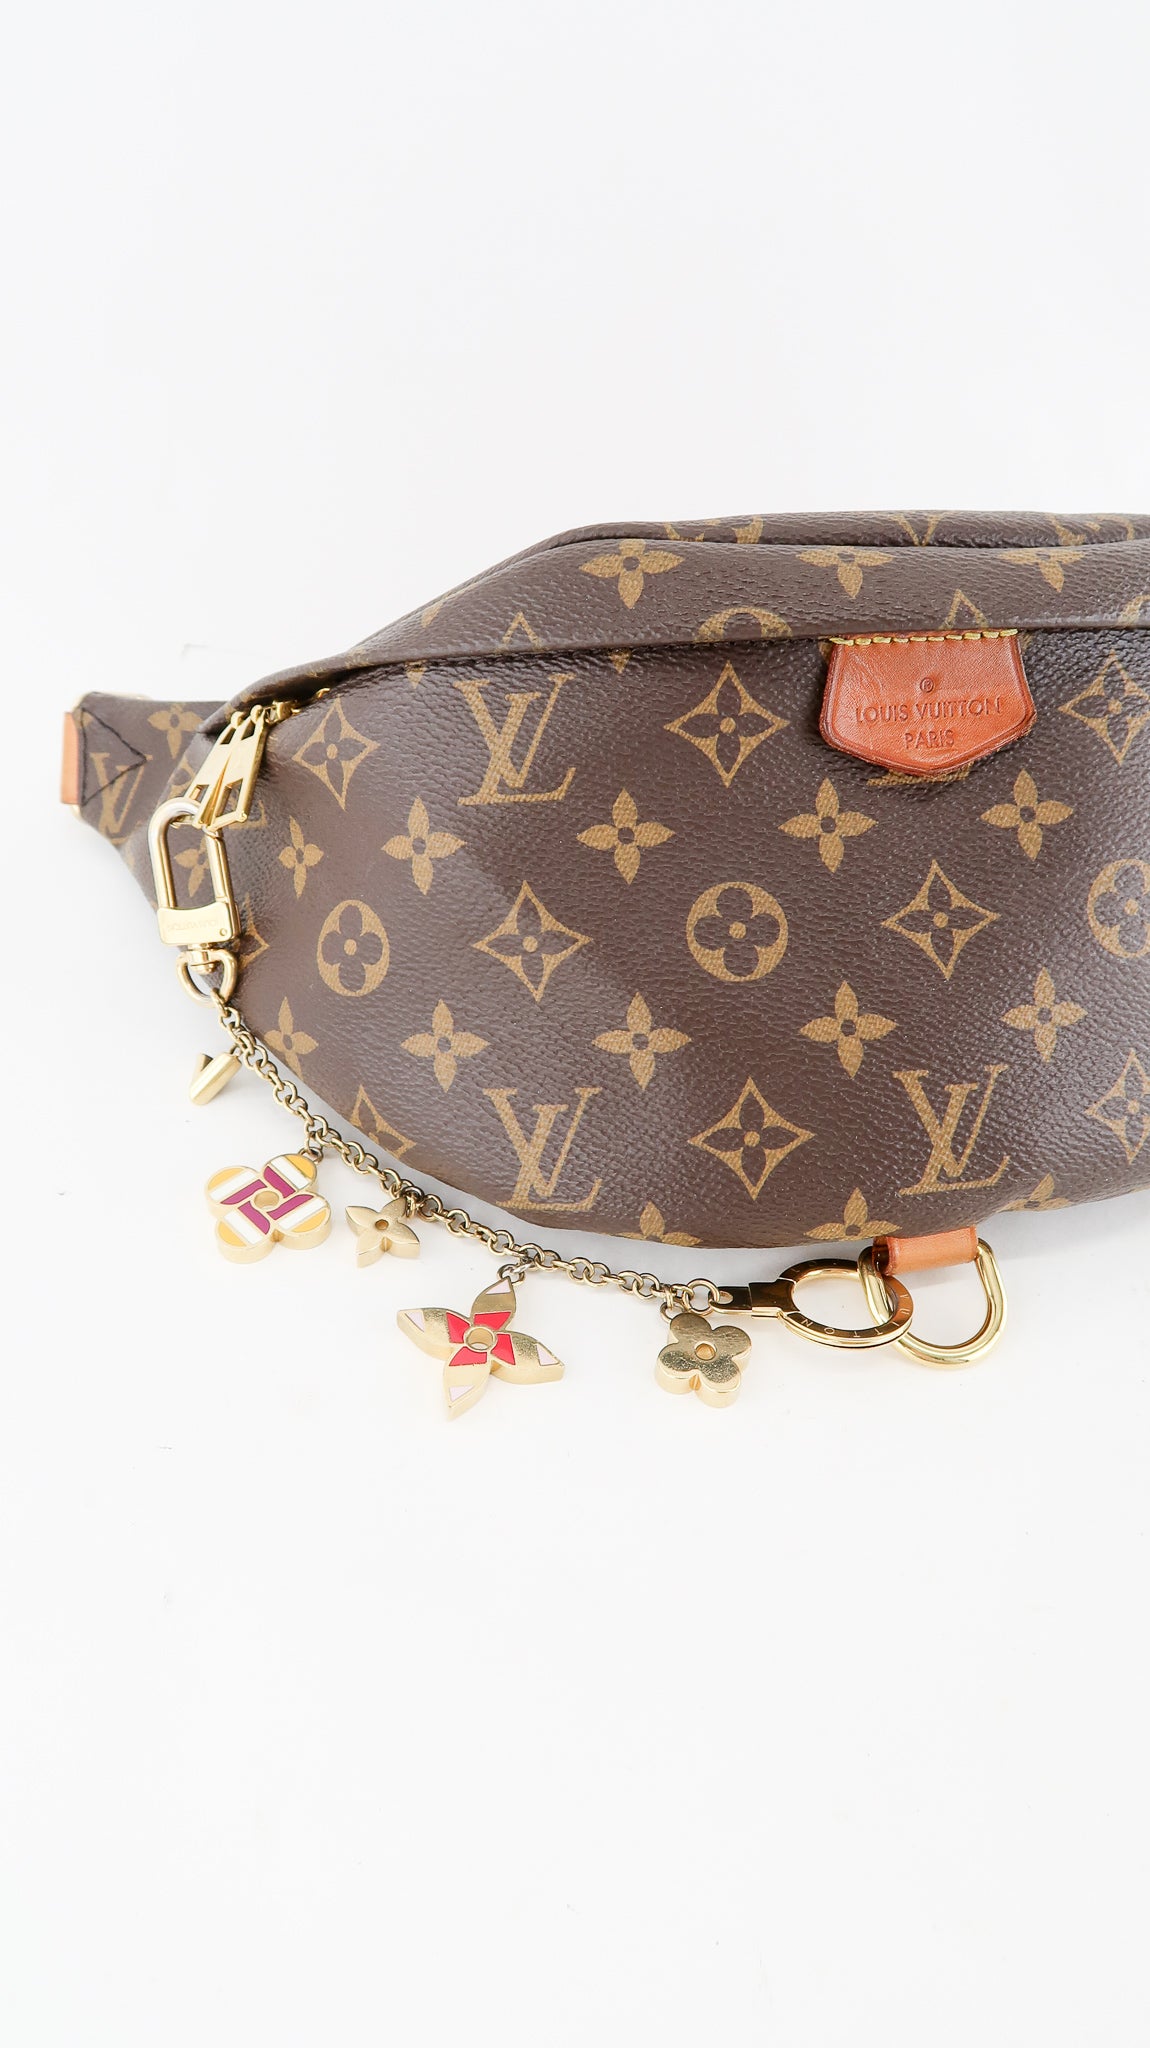 Louis Vuitton - Authenticated Monogram Bag Charm - Brown for Women, Never Worn